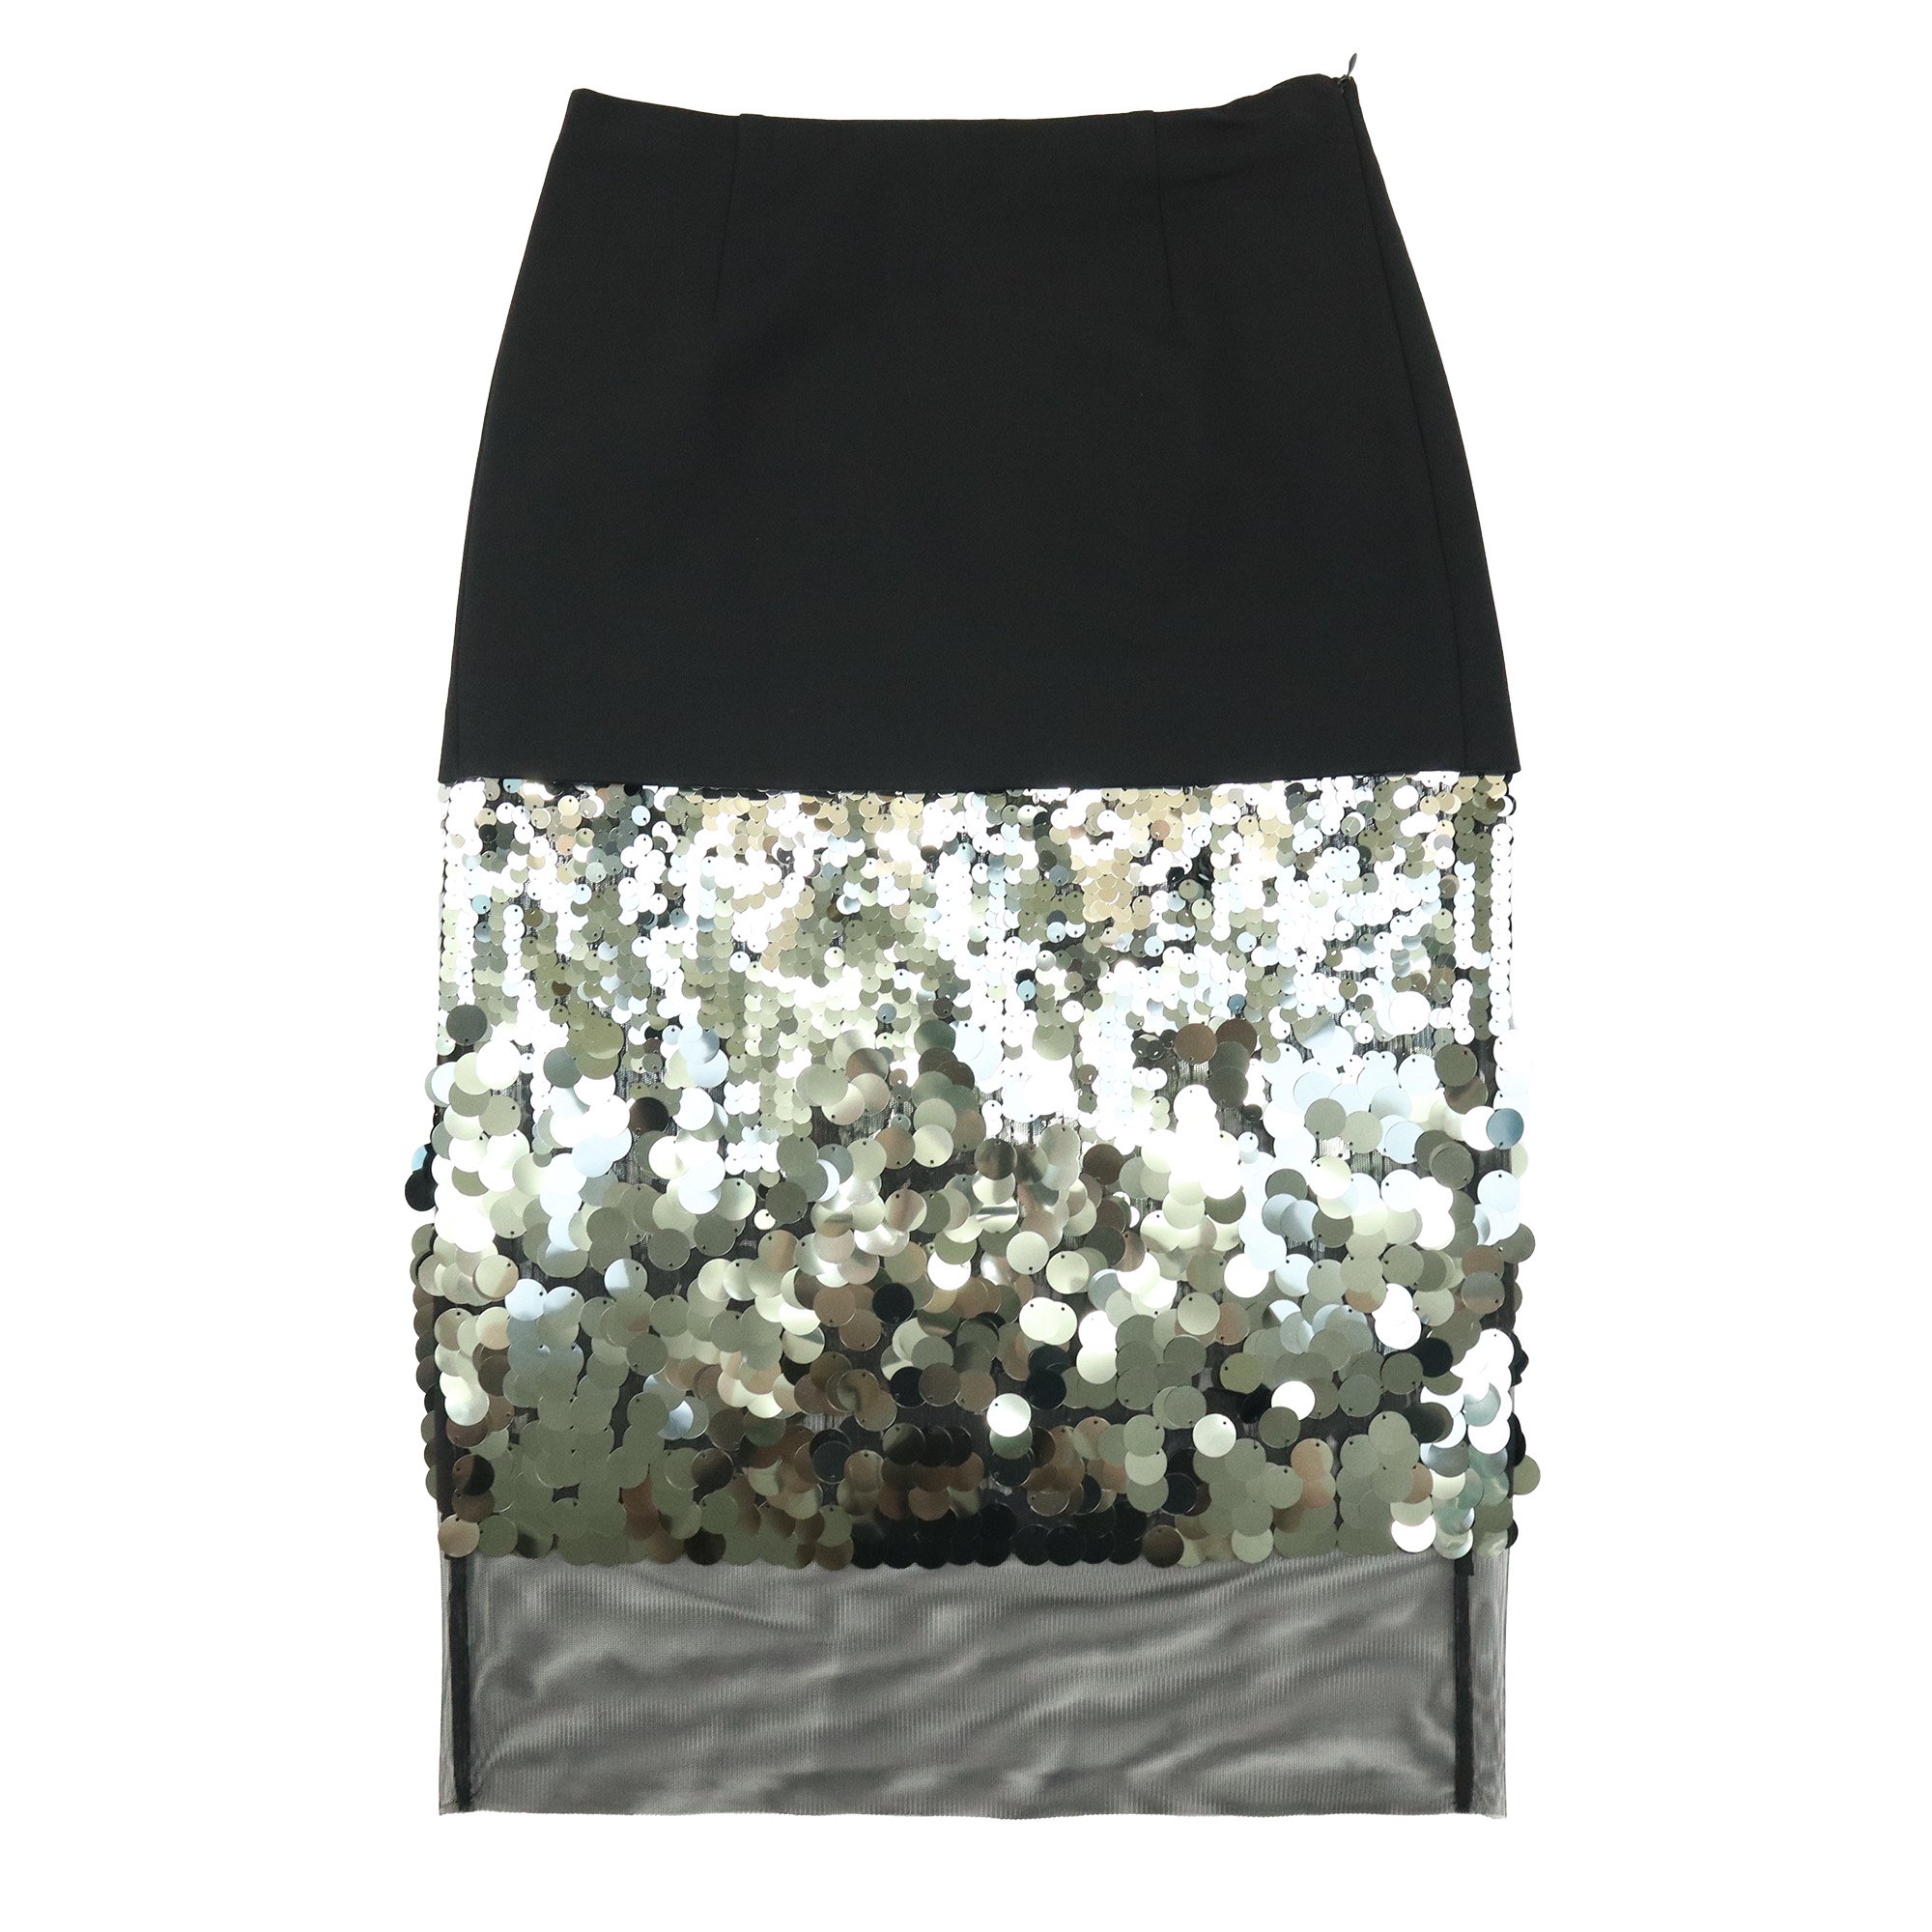 <img class='new_mark_img1' src='https://img.shop-pro.jp/img/new/icons7.gif' style='border:none;display:inline;margin:0px;padding:0px;width:auto;' />DOROTHEE SCHUMACHER SKIRT【BLACK】